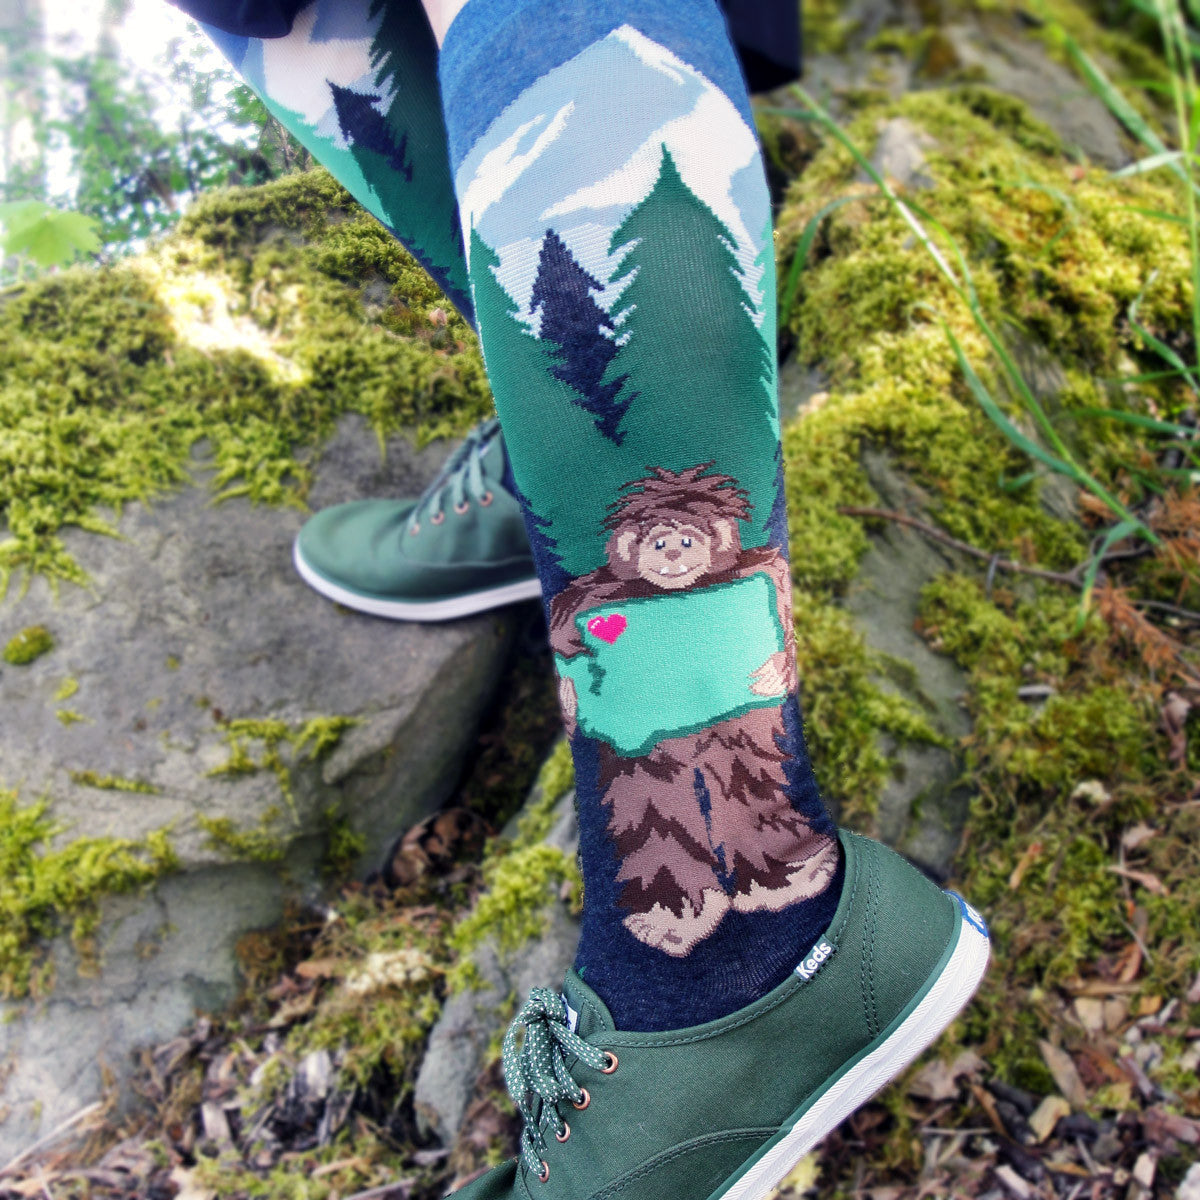 Sasquatch gives the state of Washington a bigfoot-sized hug while standing in front of a mountains-and-evergreen scene on these green and blue knee socks by ModSocks.